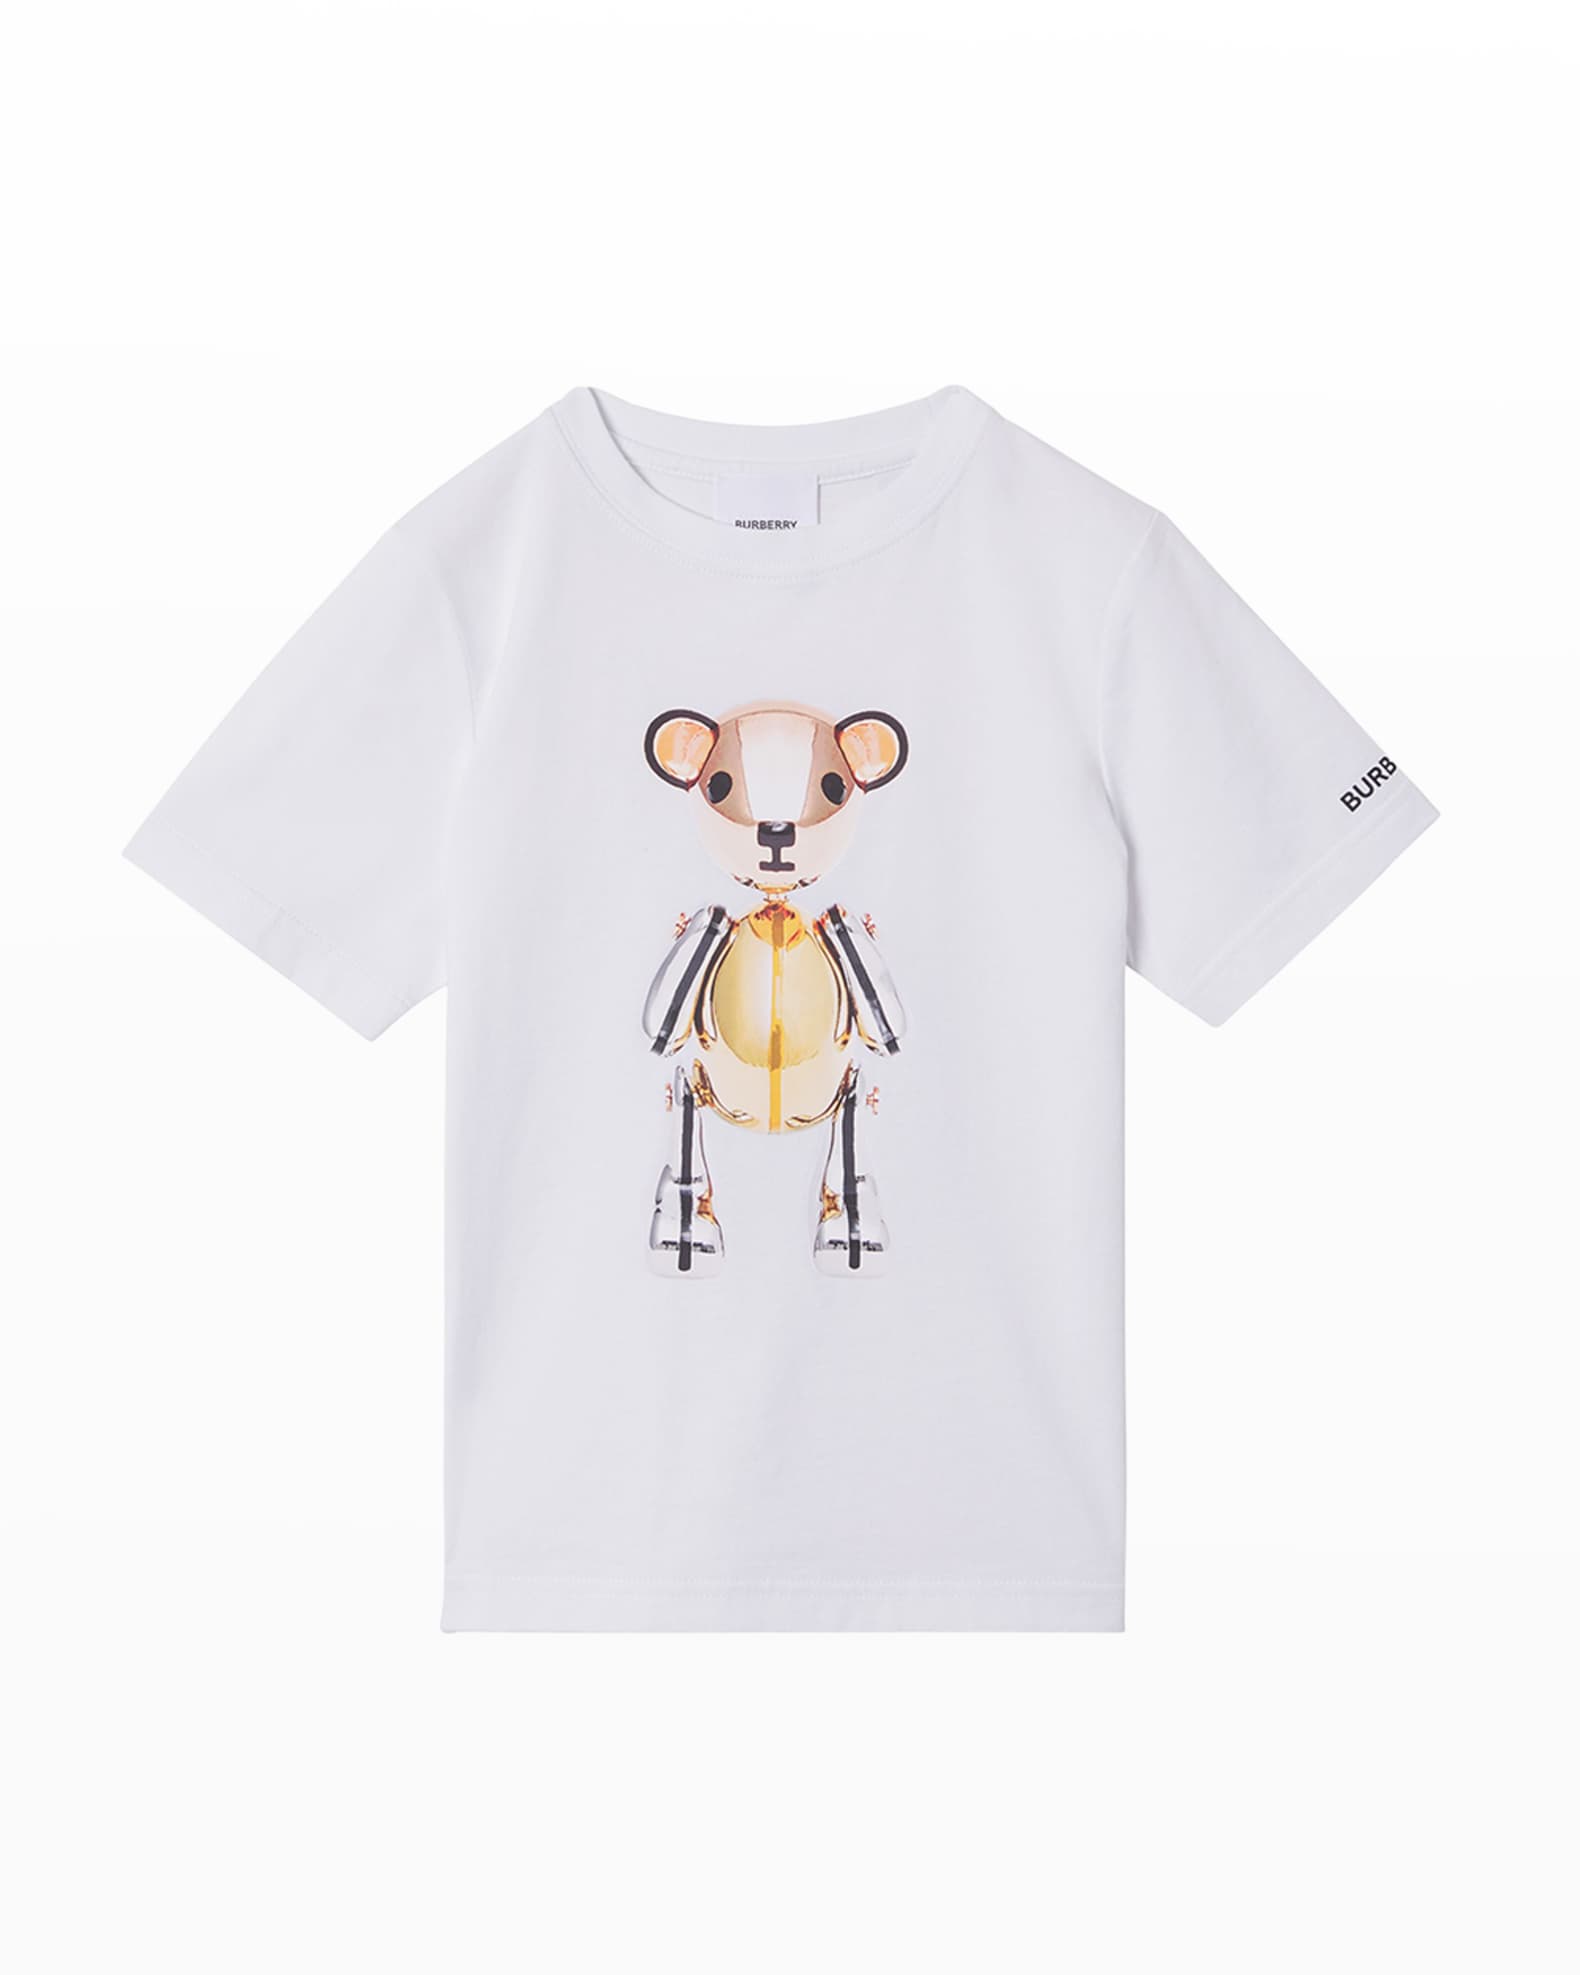 Burberry Girl's Rose Gold Bear Graphic T-Shirt, Size 3-14 | Neiman Marcus